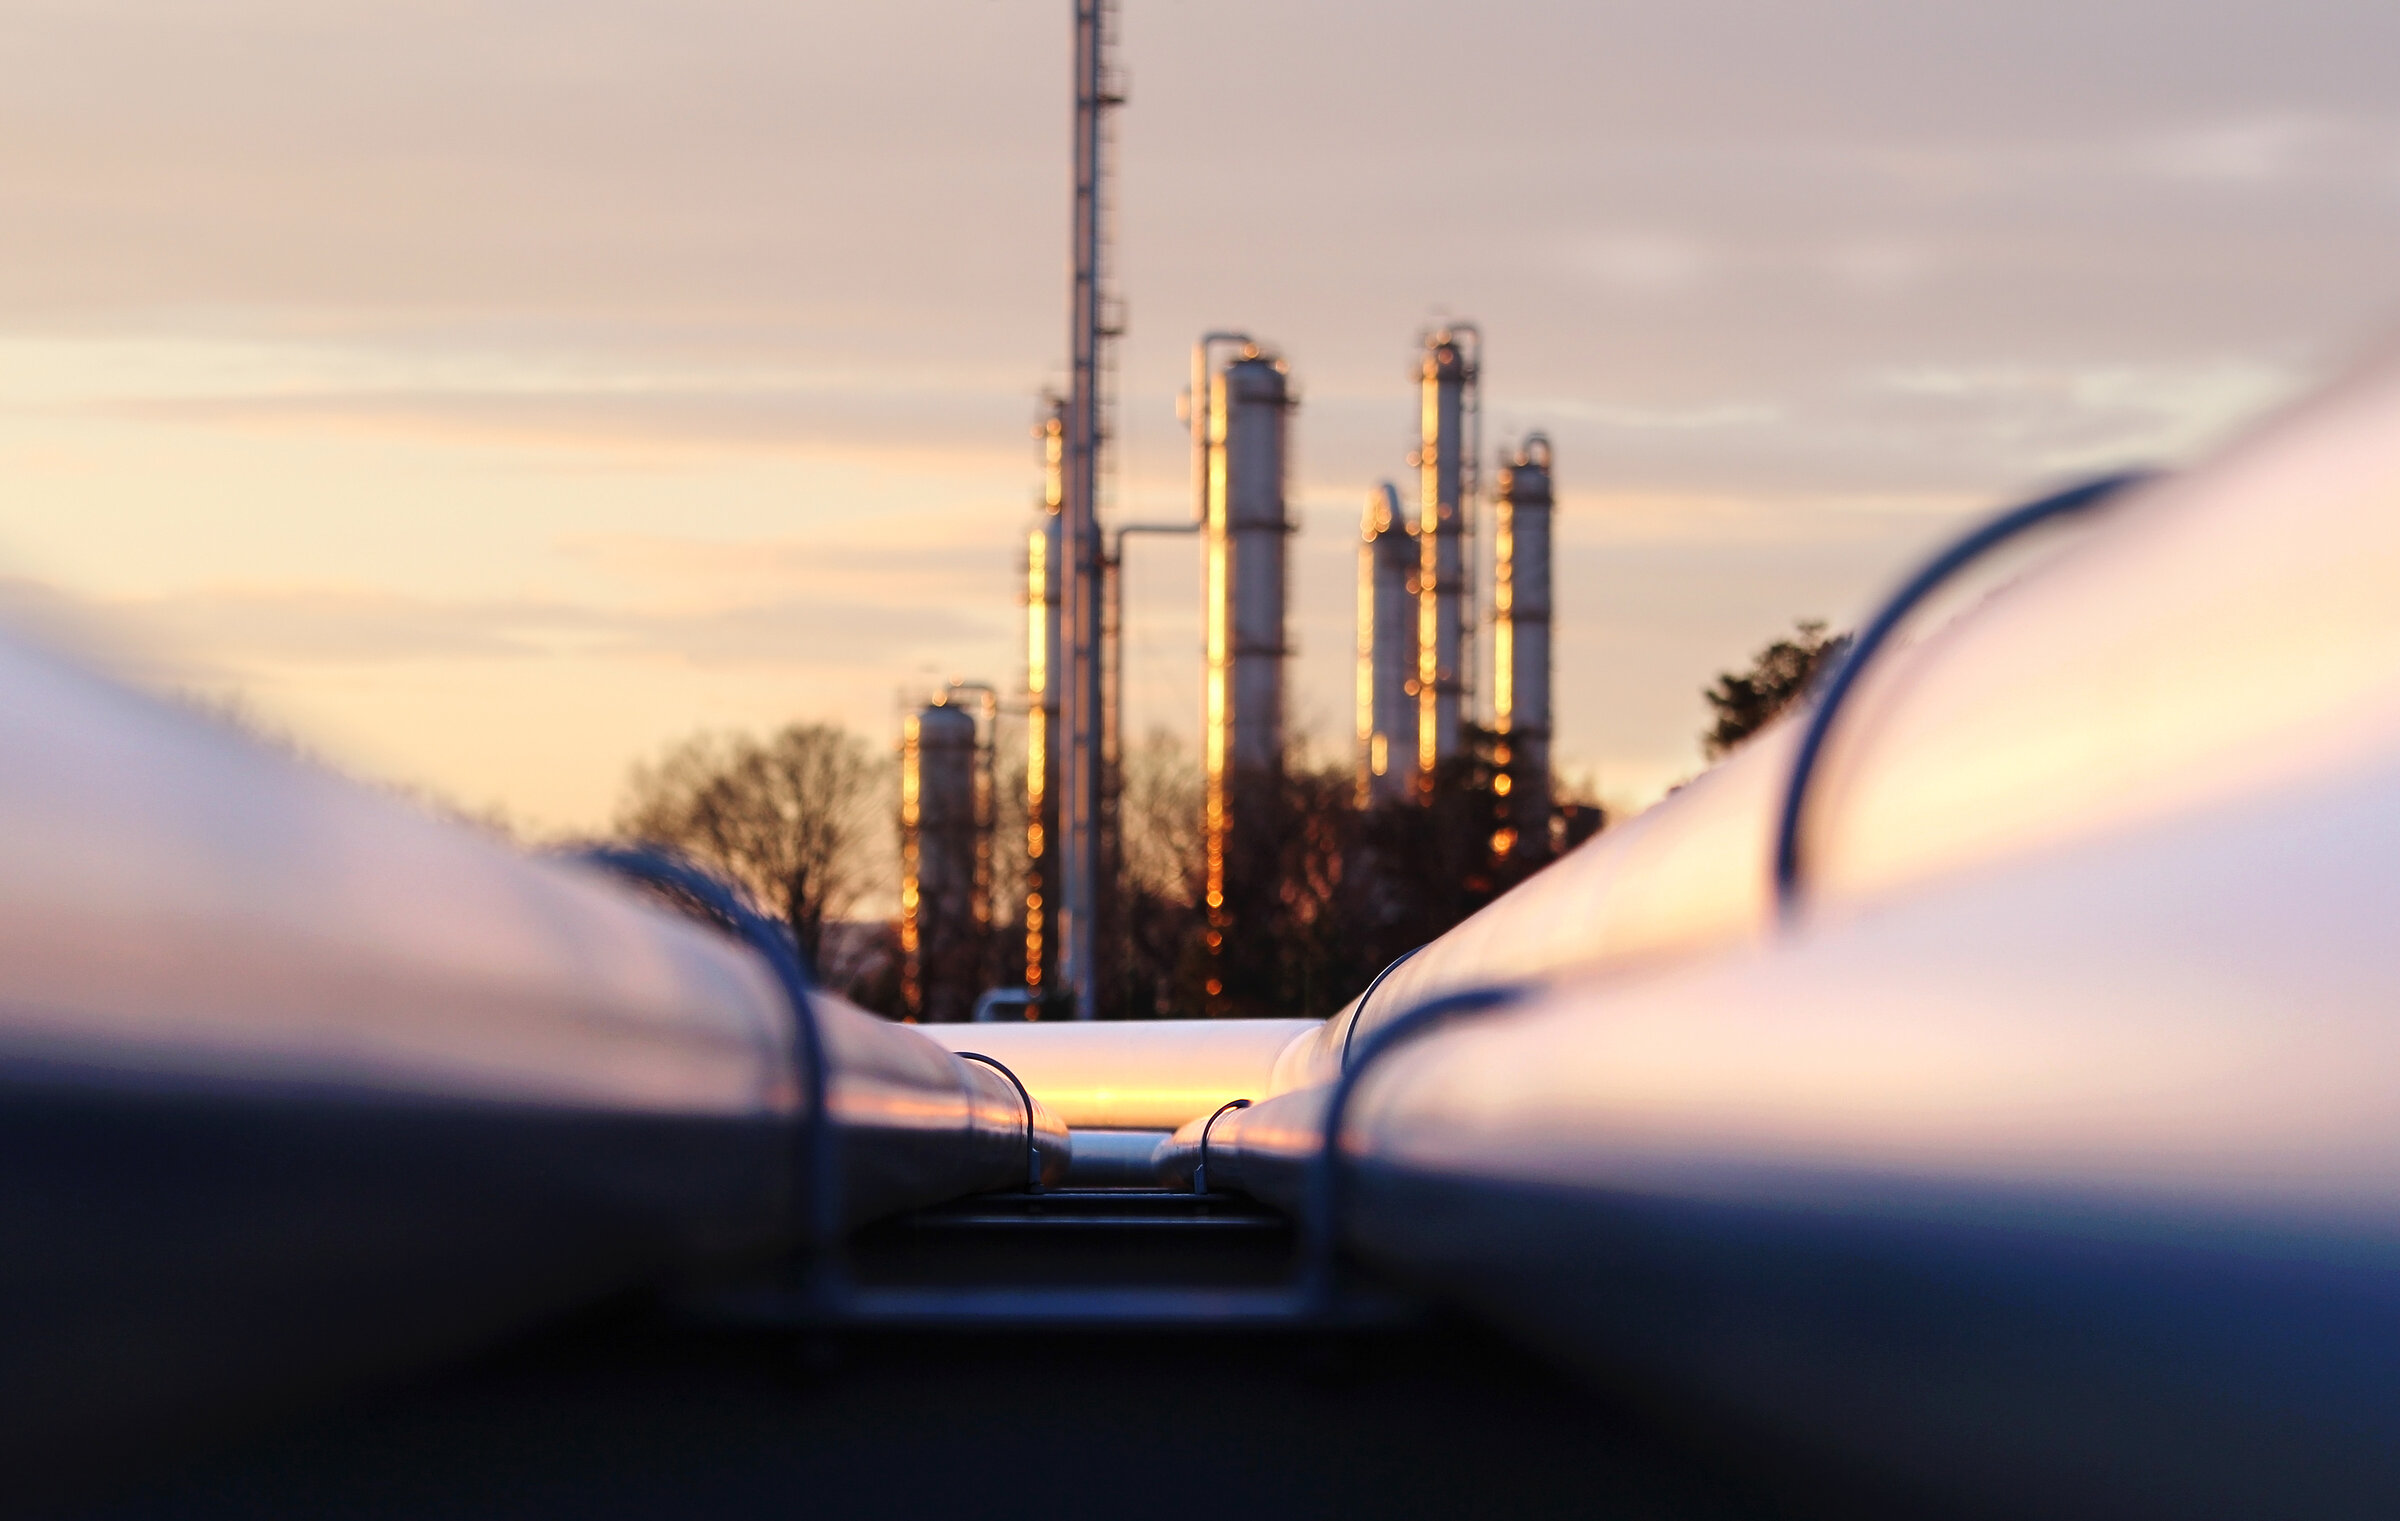 sunset at crude oil refinery with pipeline network